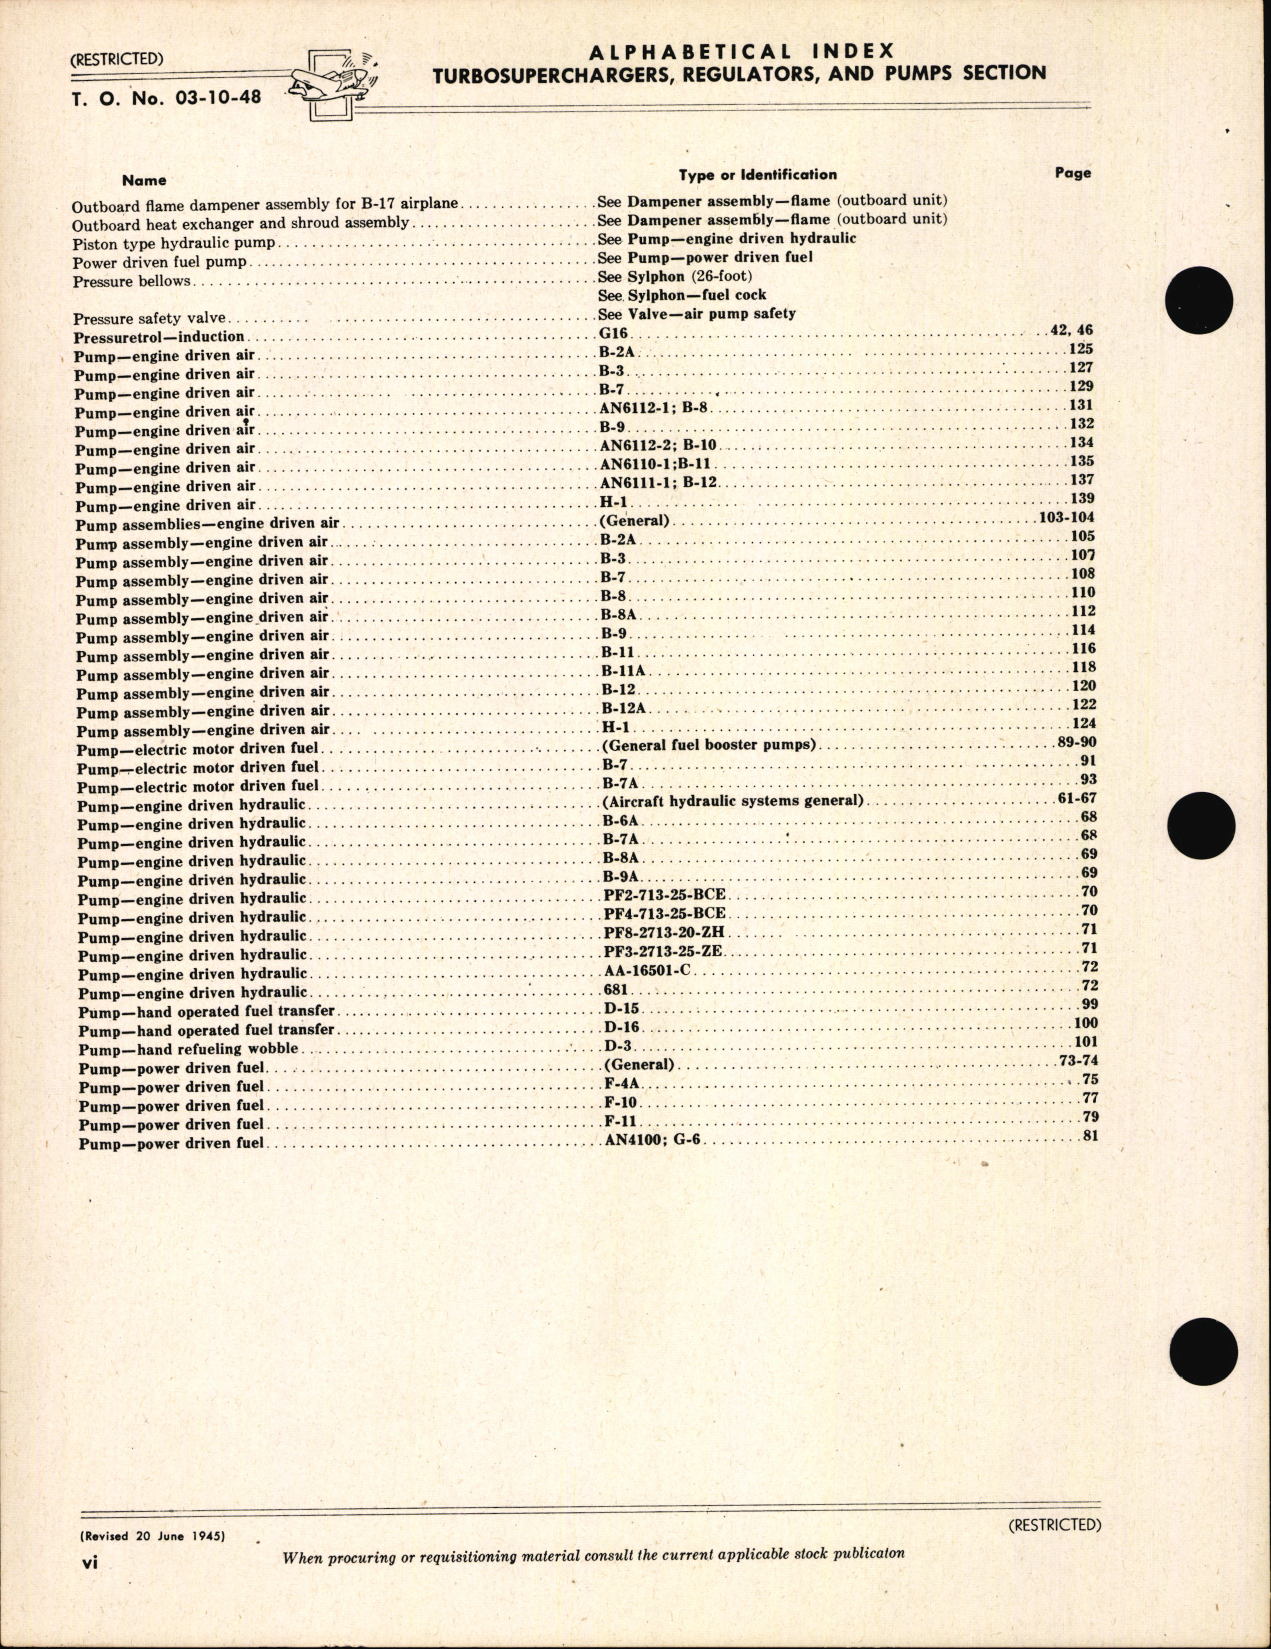 Sample page 8 from AirCorps Library document: Index of Army-Navy Aeronautical Equipment - Turbosuperchargers and Regulators, Pumps, and Pump Accessories